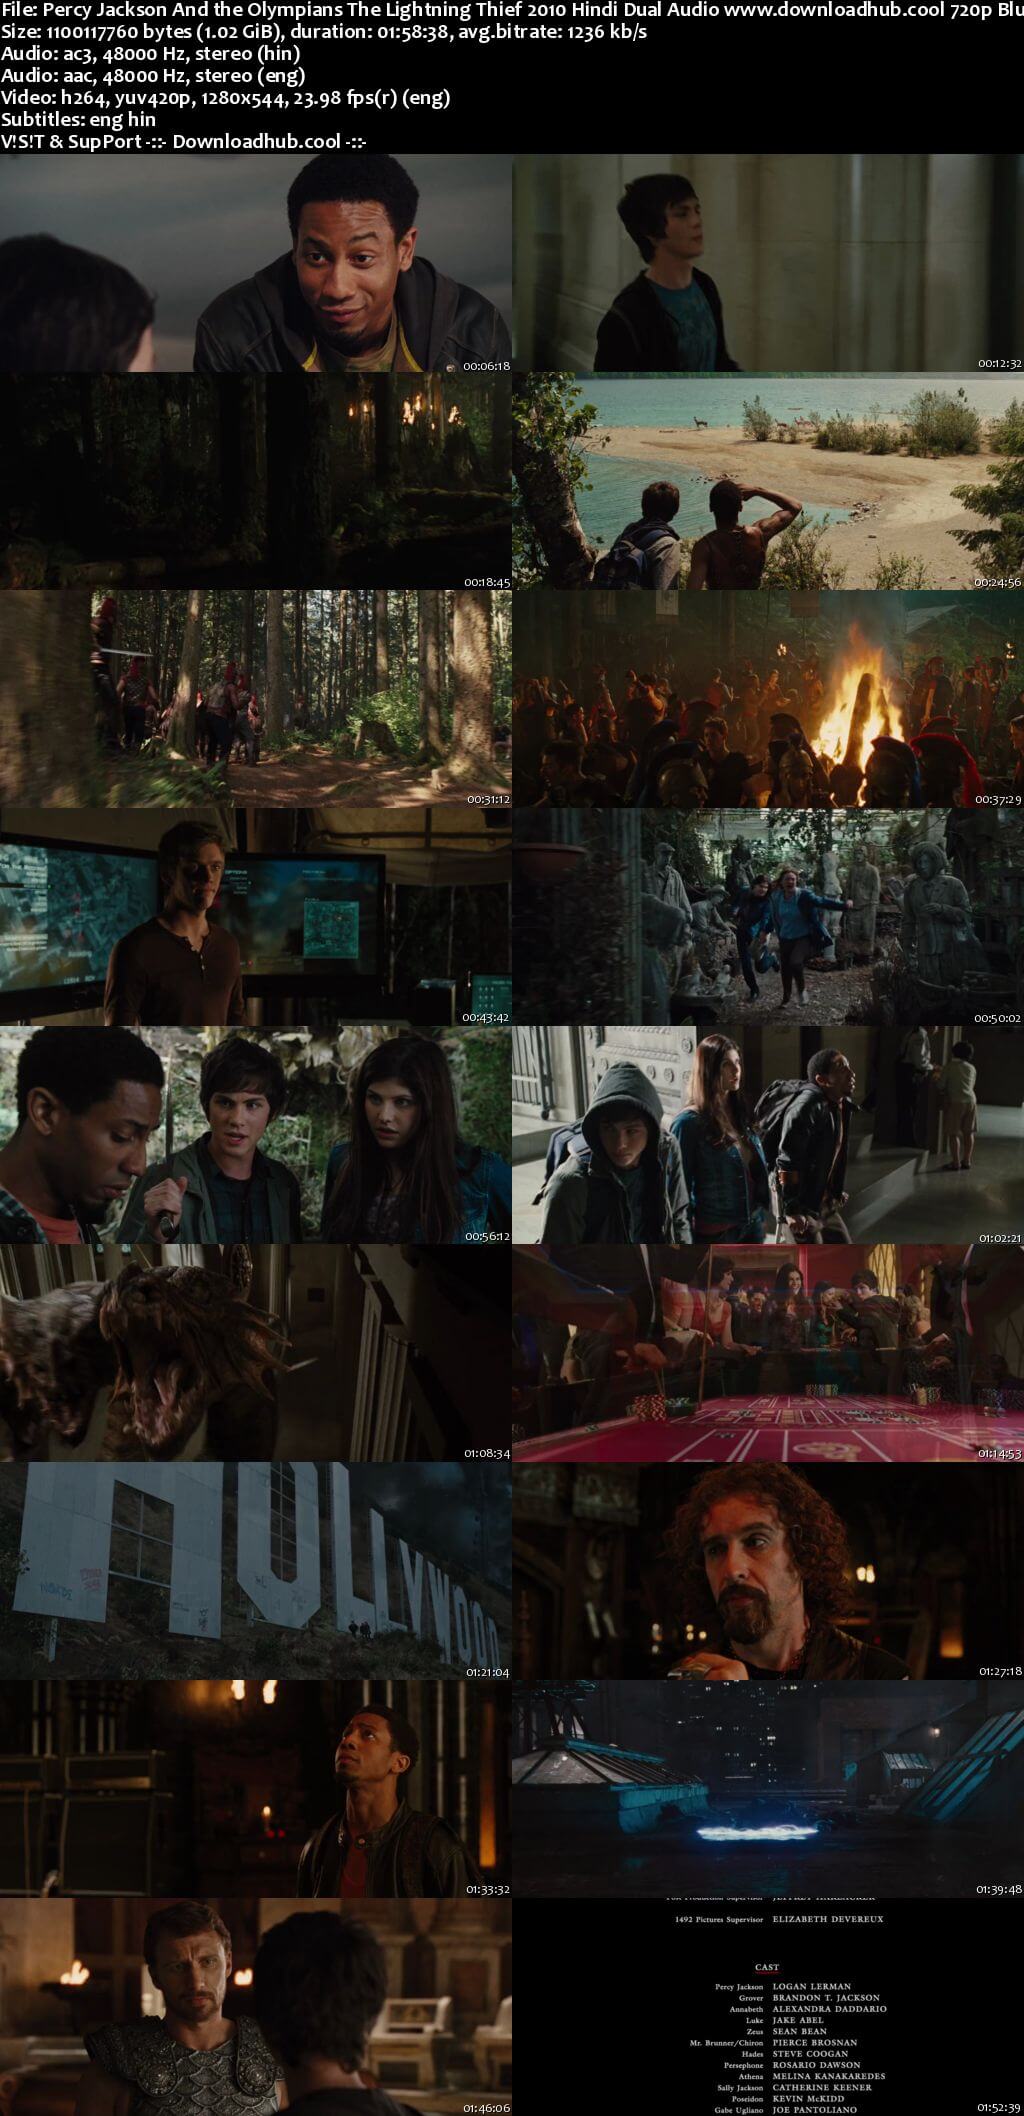 Percy Jackson And the Olympians The Lightning Thief 2010 Hindi Dual Audio 720p BluRay ESubs